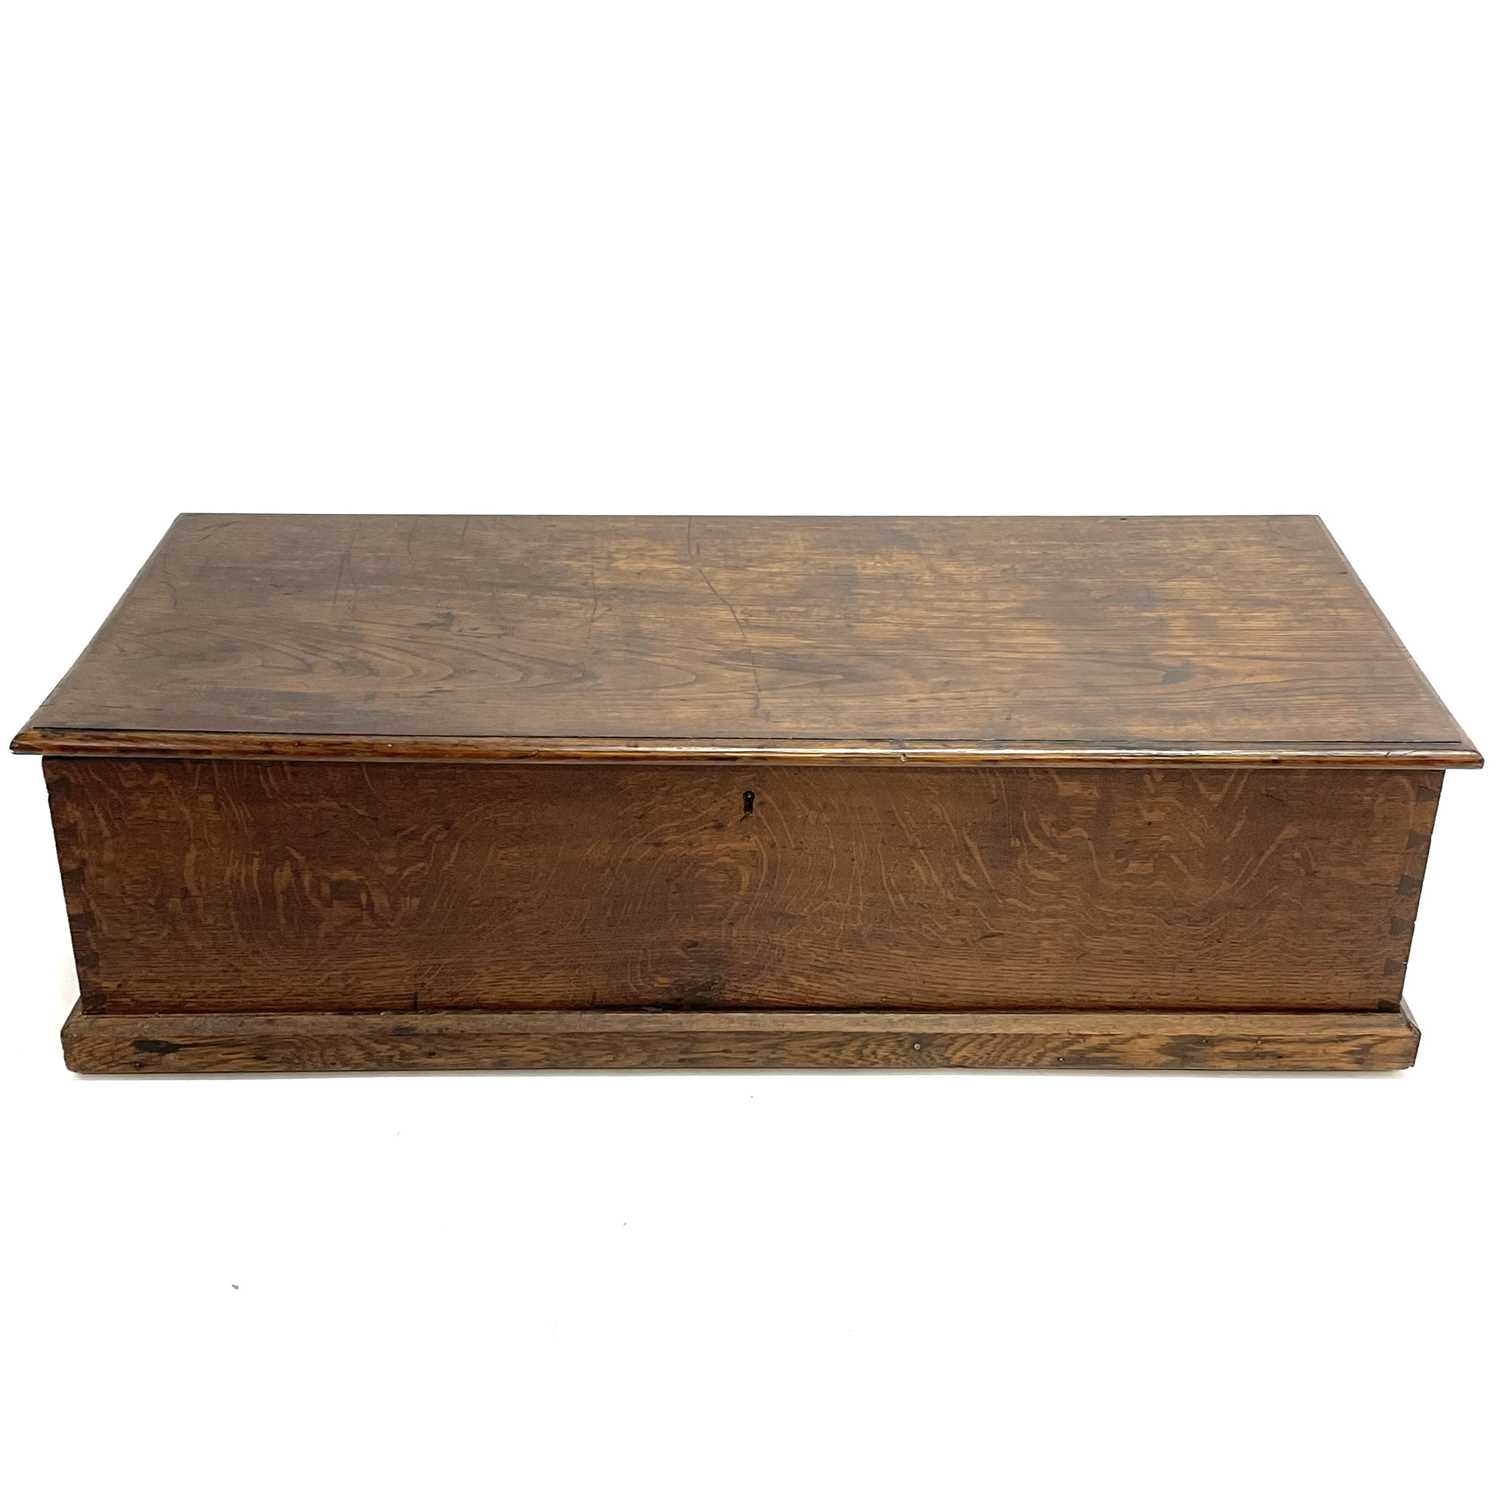 Lot 18 - An ash and oak blanket chest.